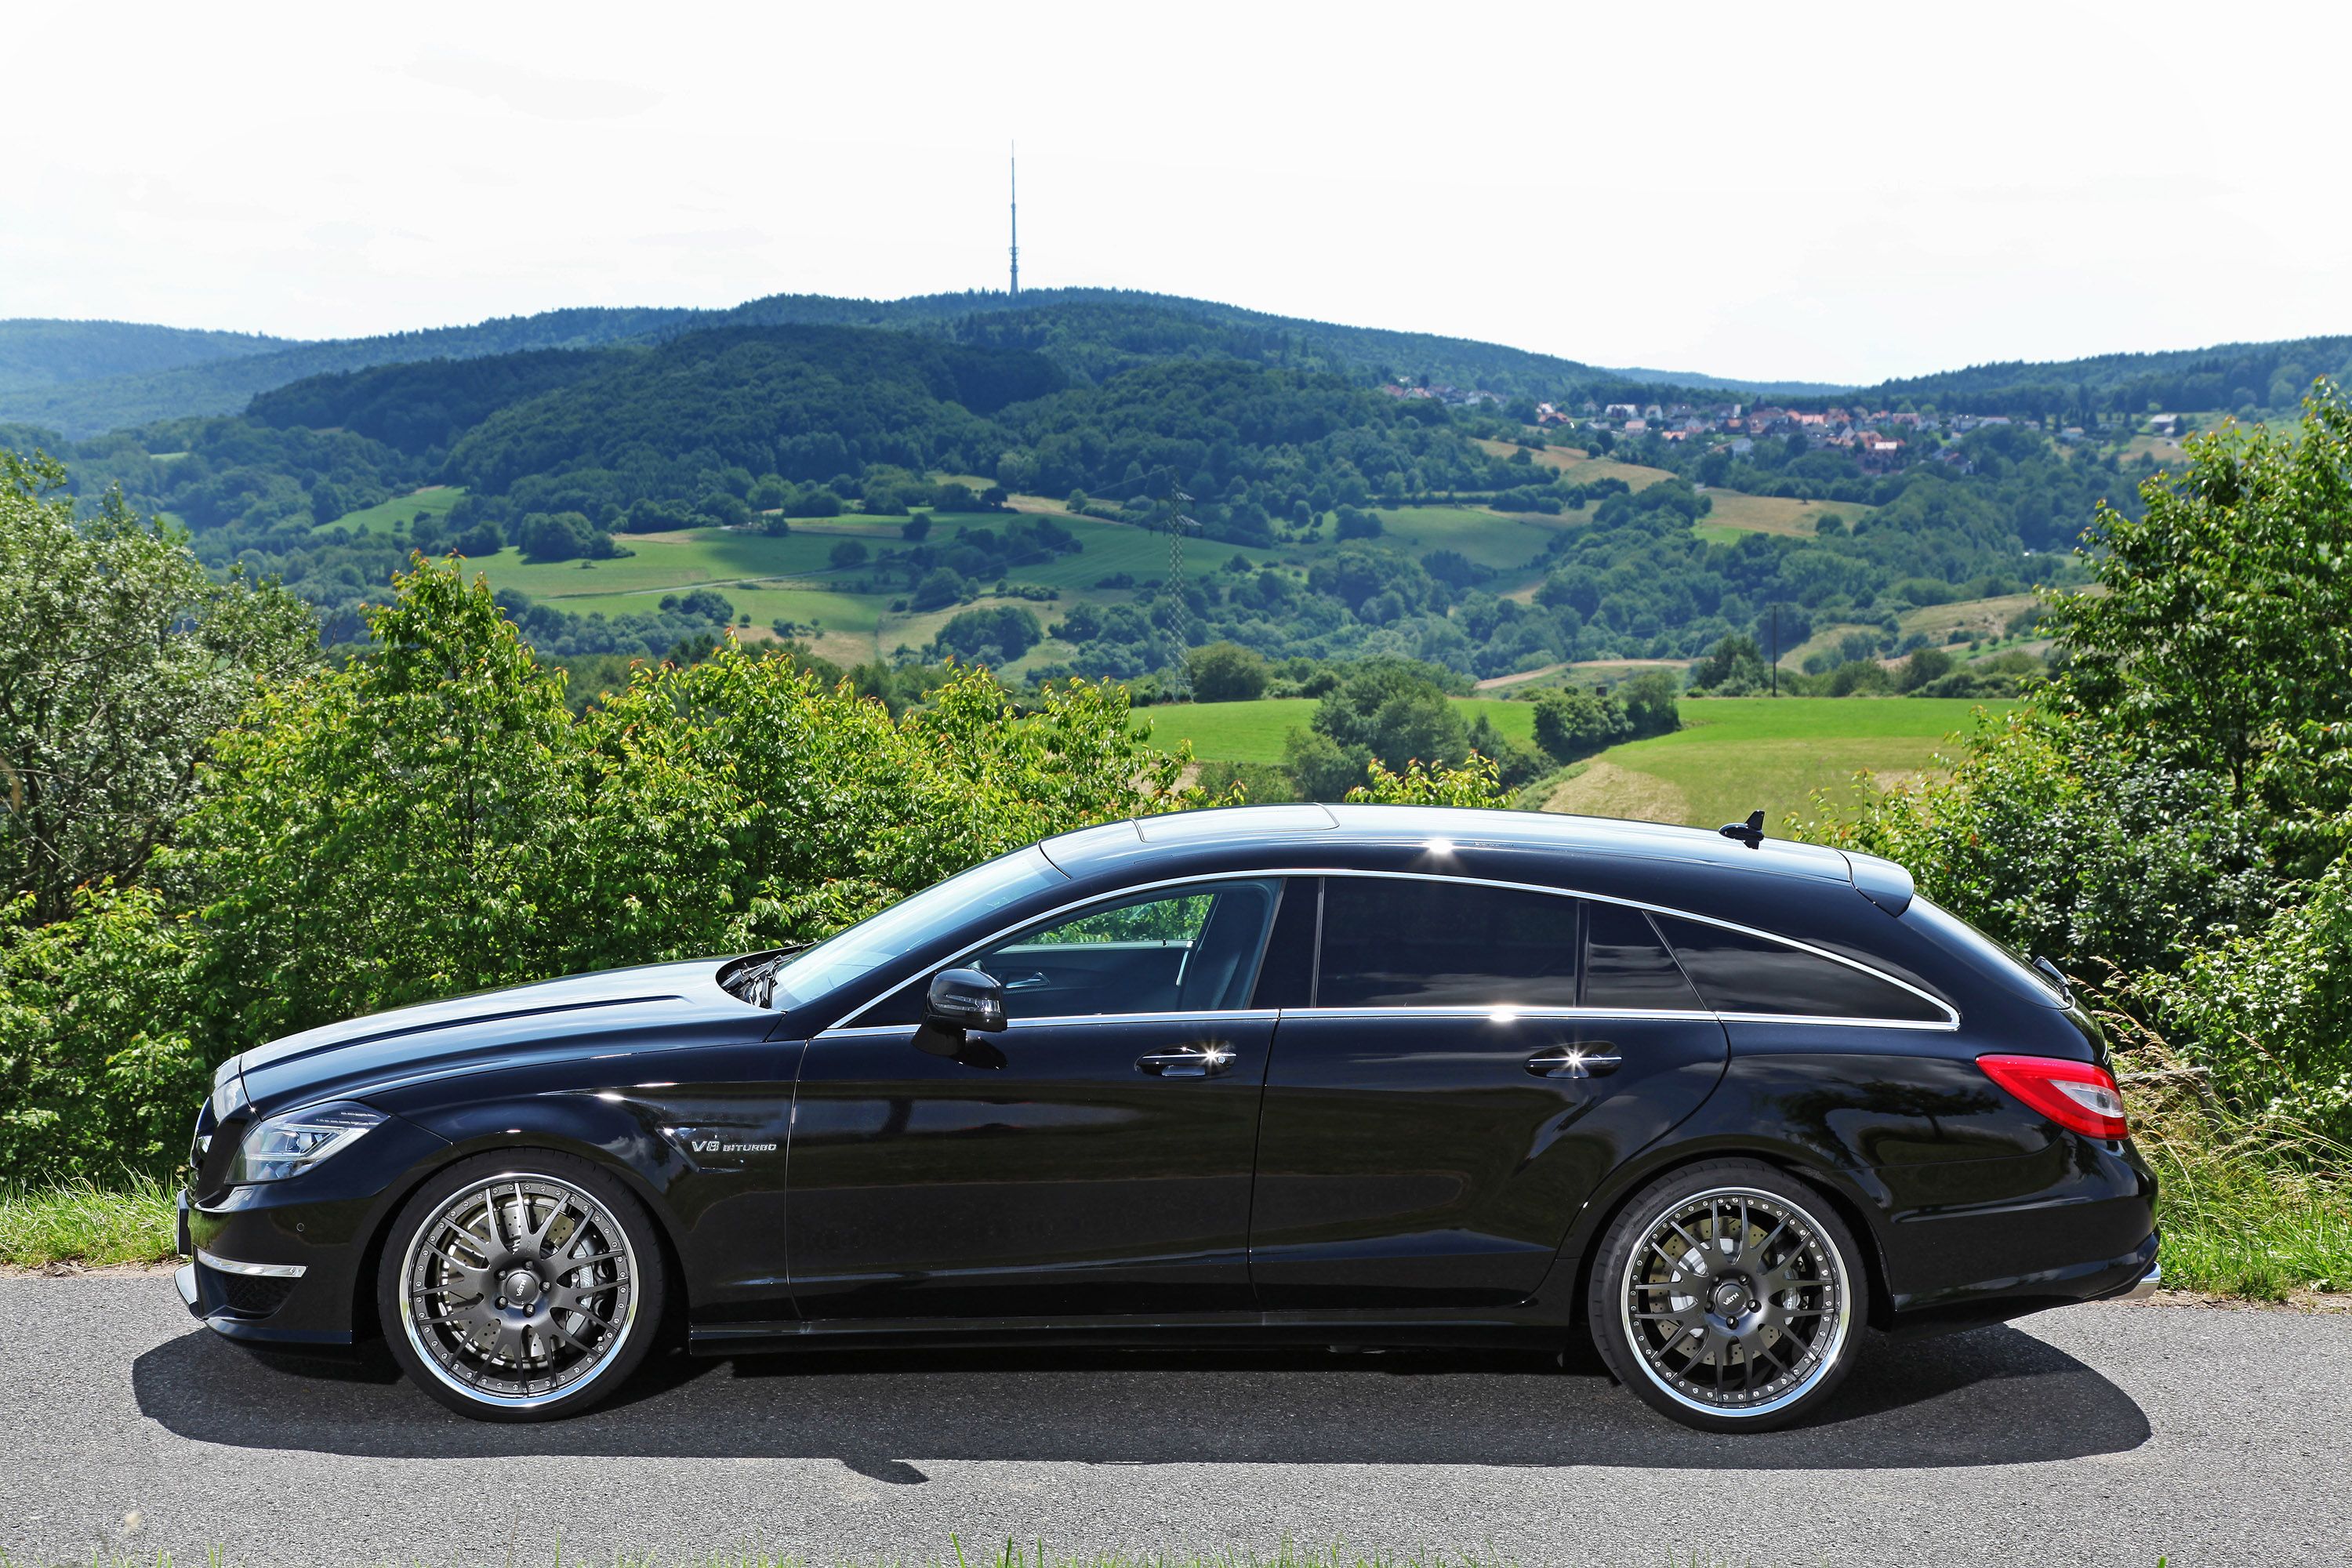 2013 Mercedes CLS 63 AMG Shooting Brake by Vath